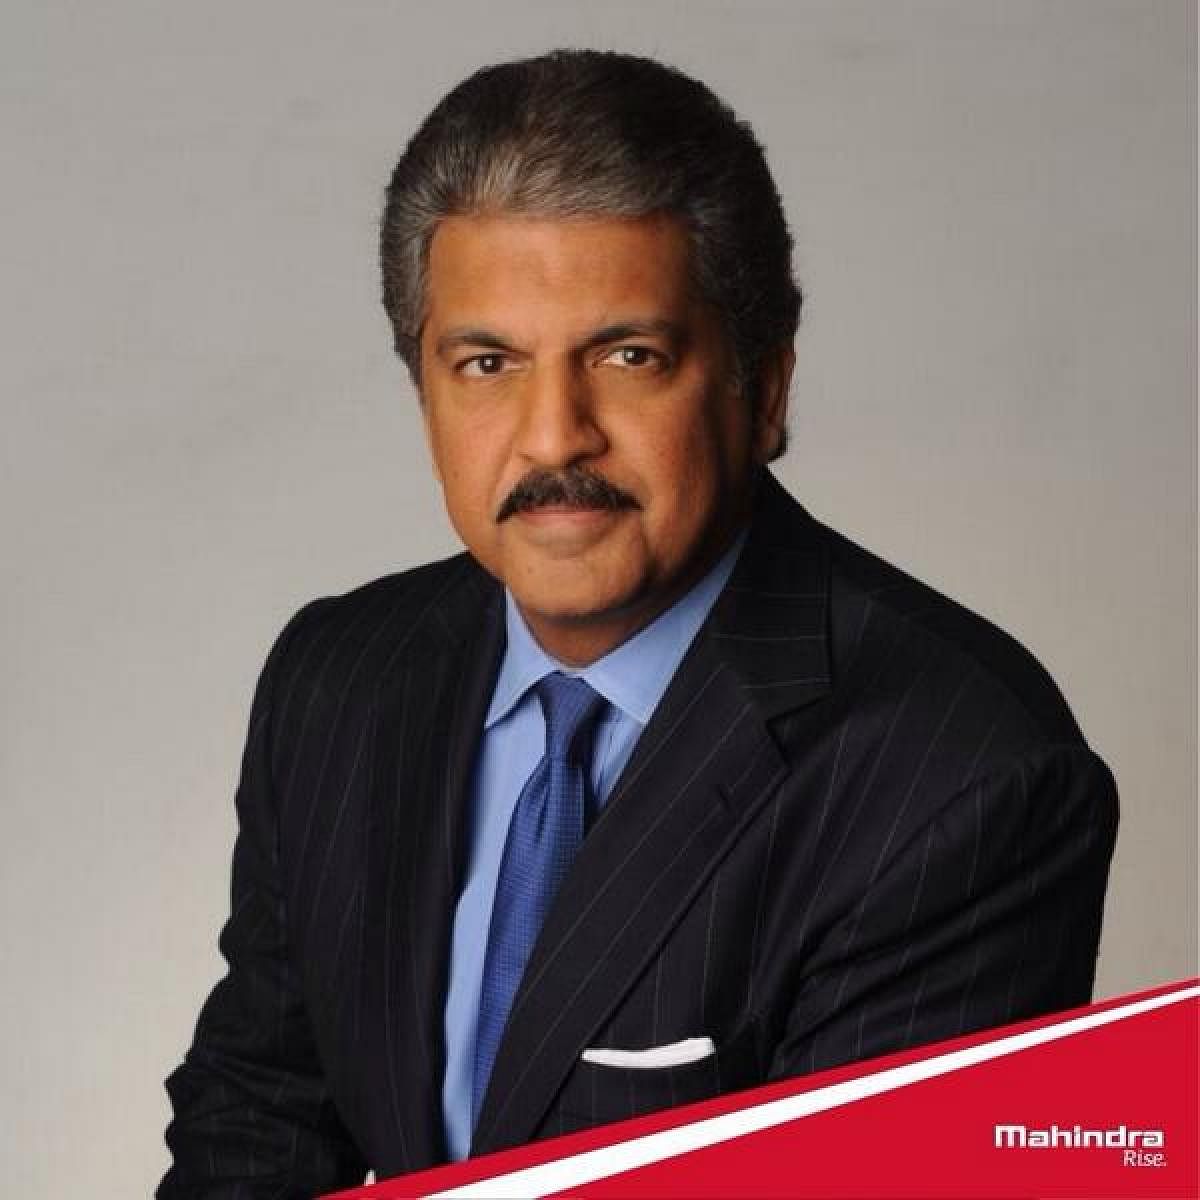 Mahindra Group Chairman Anand Mahindra said lowering GST on automobiles would help the economy. (DH Photo)